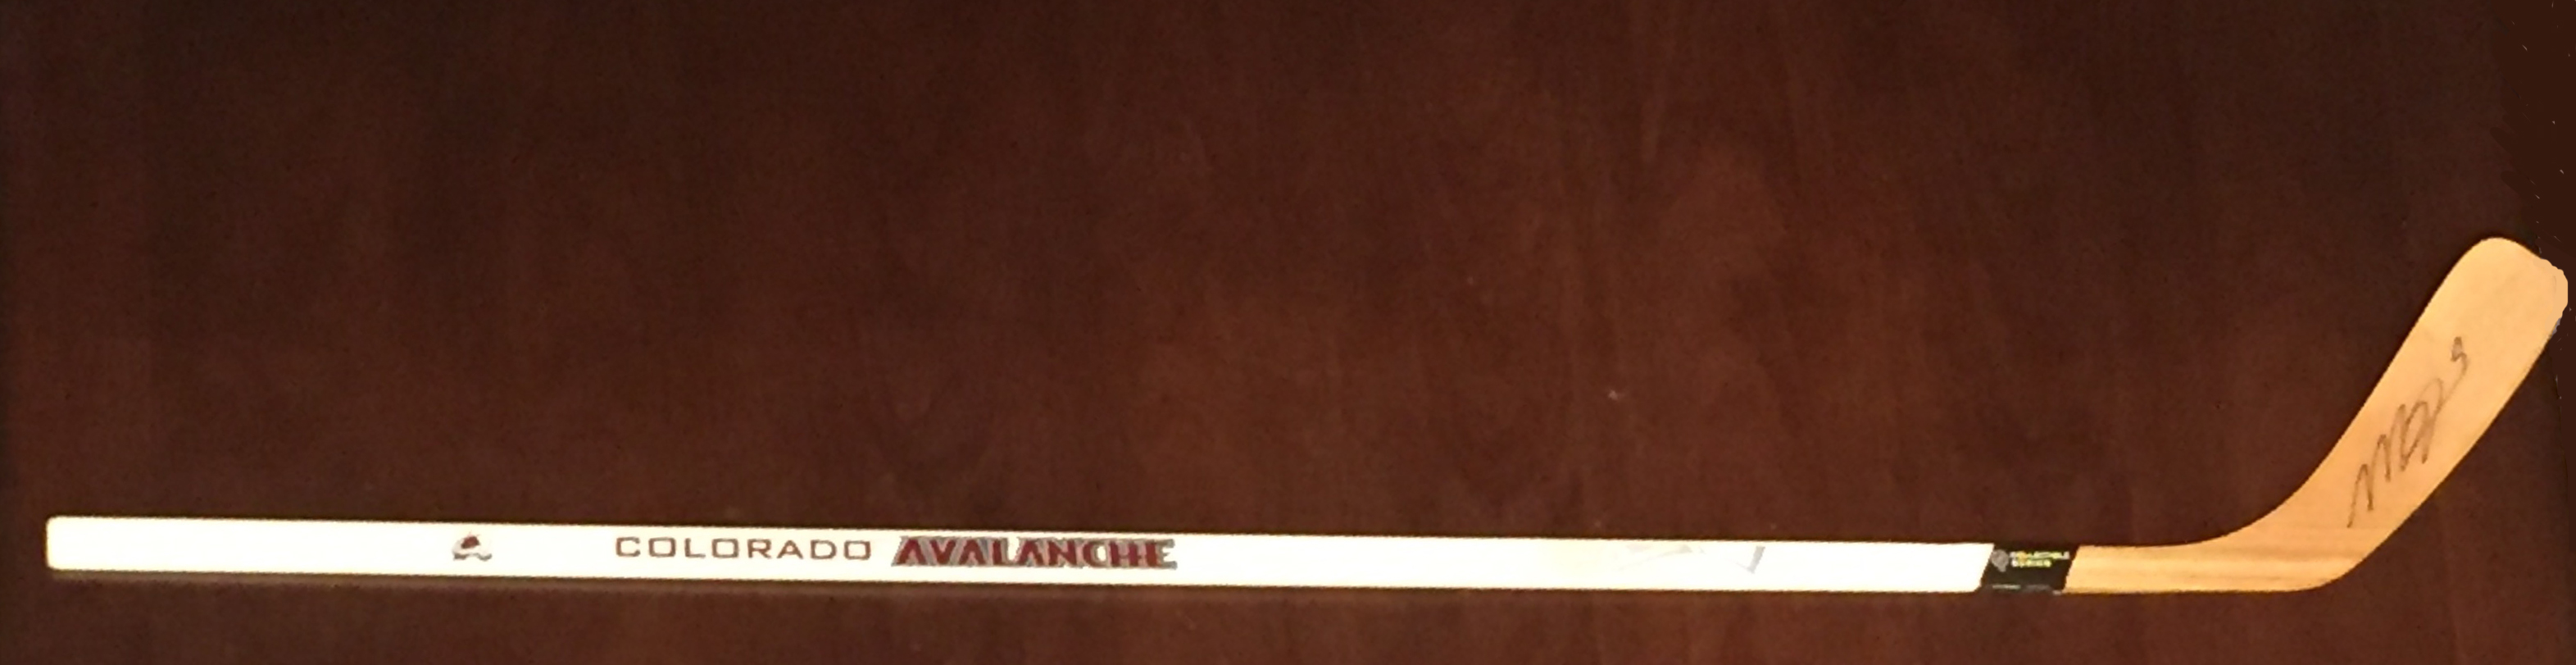 (1) Matt Duchene signed collectible hockey stick from the Colorado Avalanche